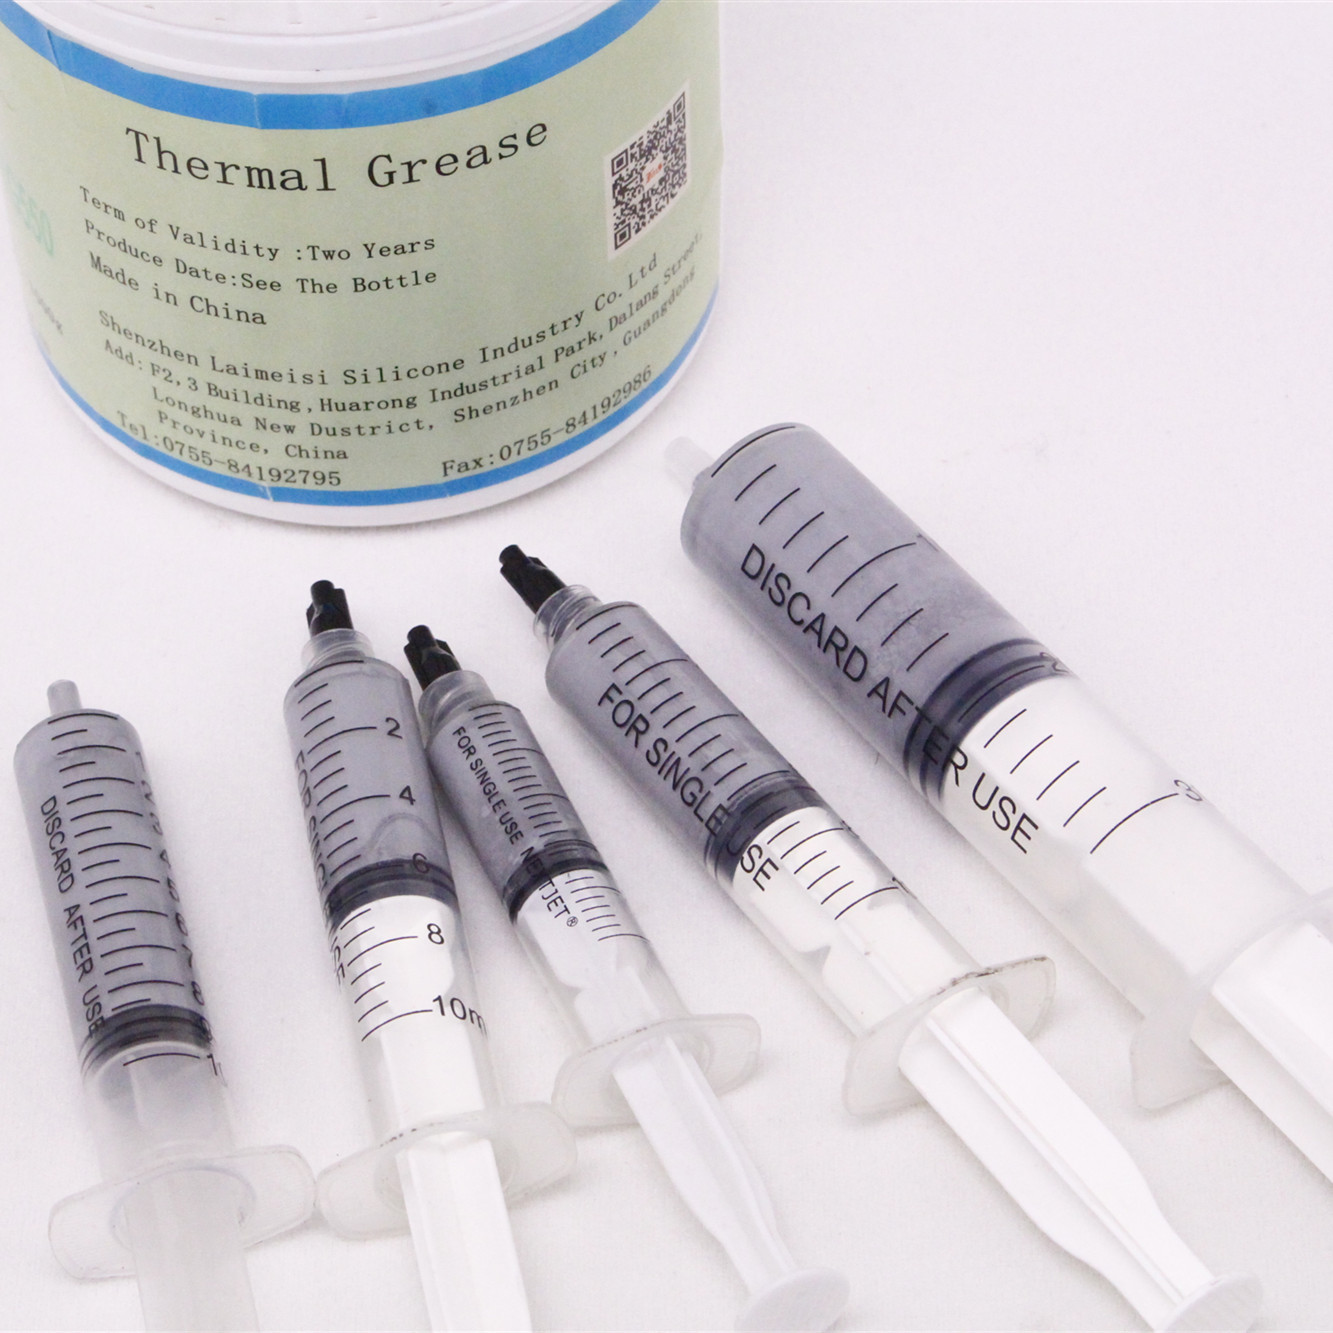 LMS-TG550 High Performance Heat Sink Compound Custom Thermal Paste High Quality Thermal Conductive Grease 